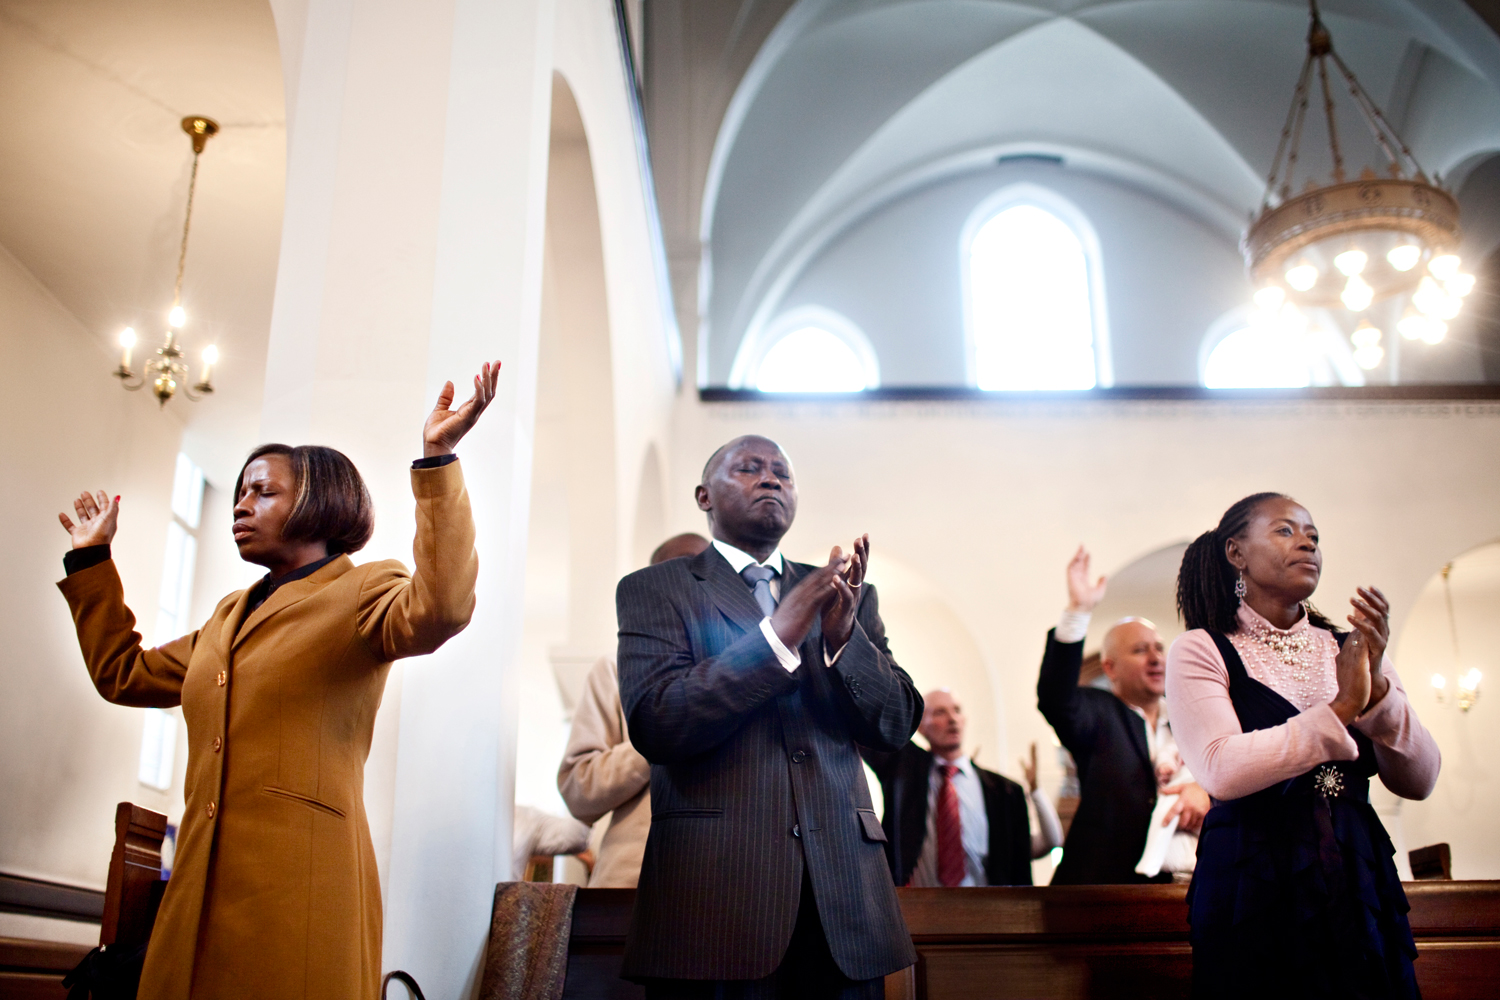  Love for God.  'Church on the rock' gathers Christians from different parts of Africa in church of Timotheus in Copenhagen, Denmark.   